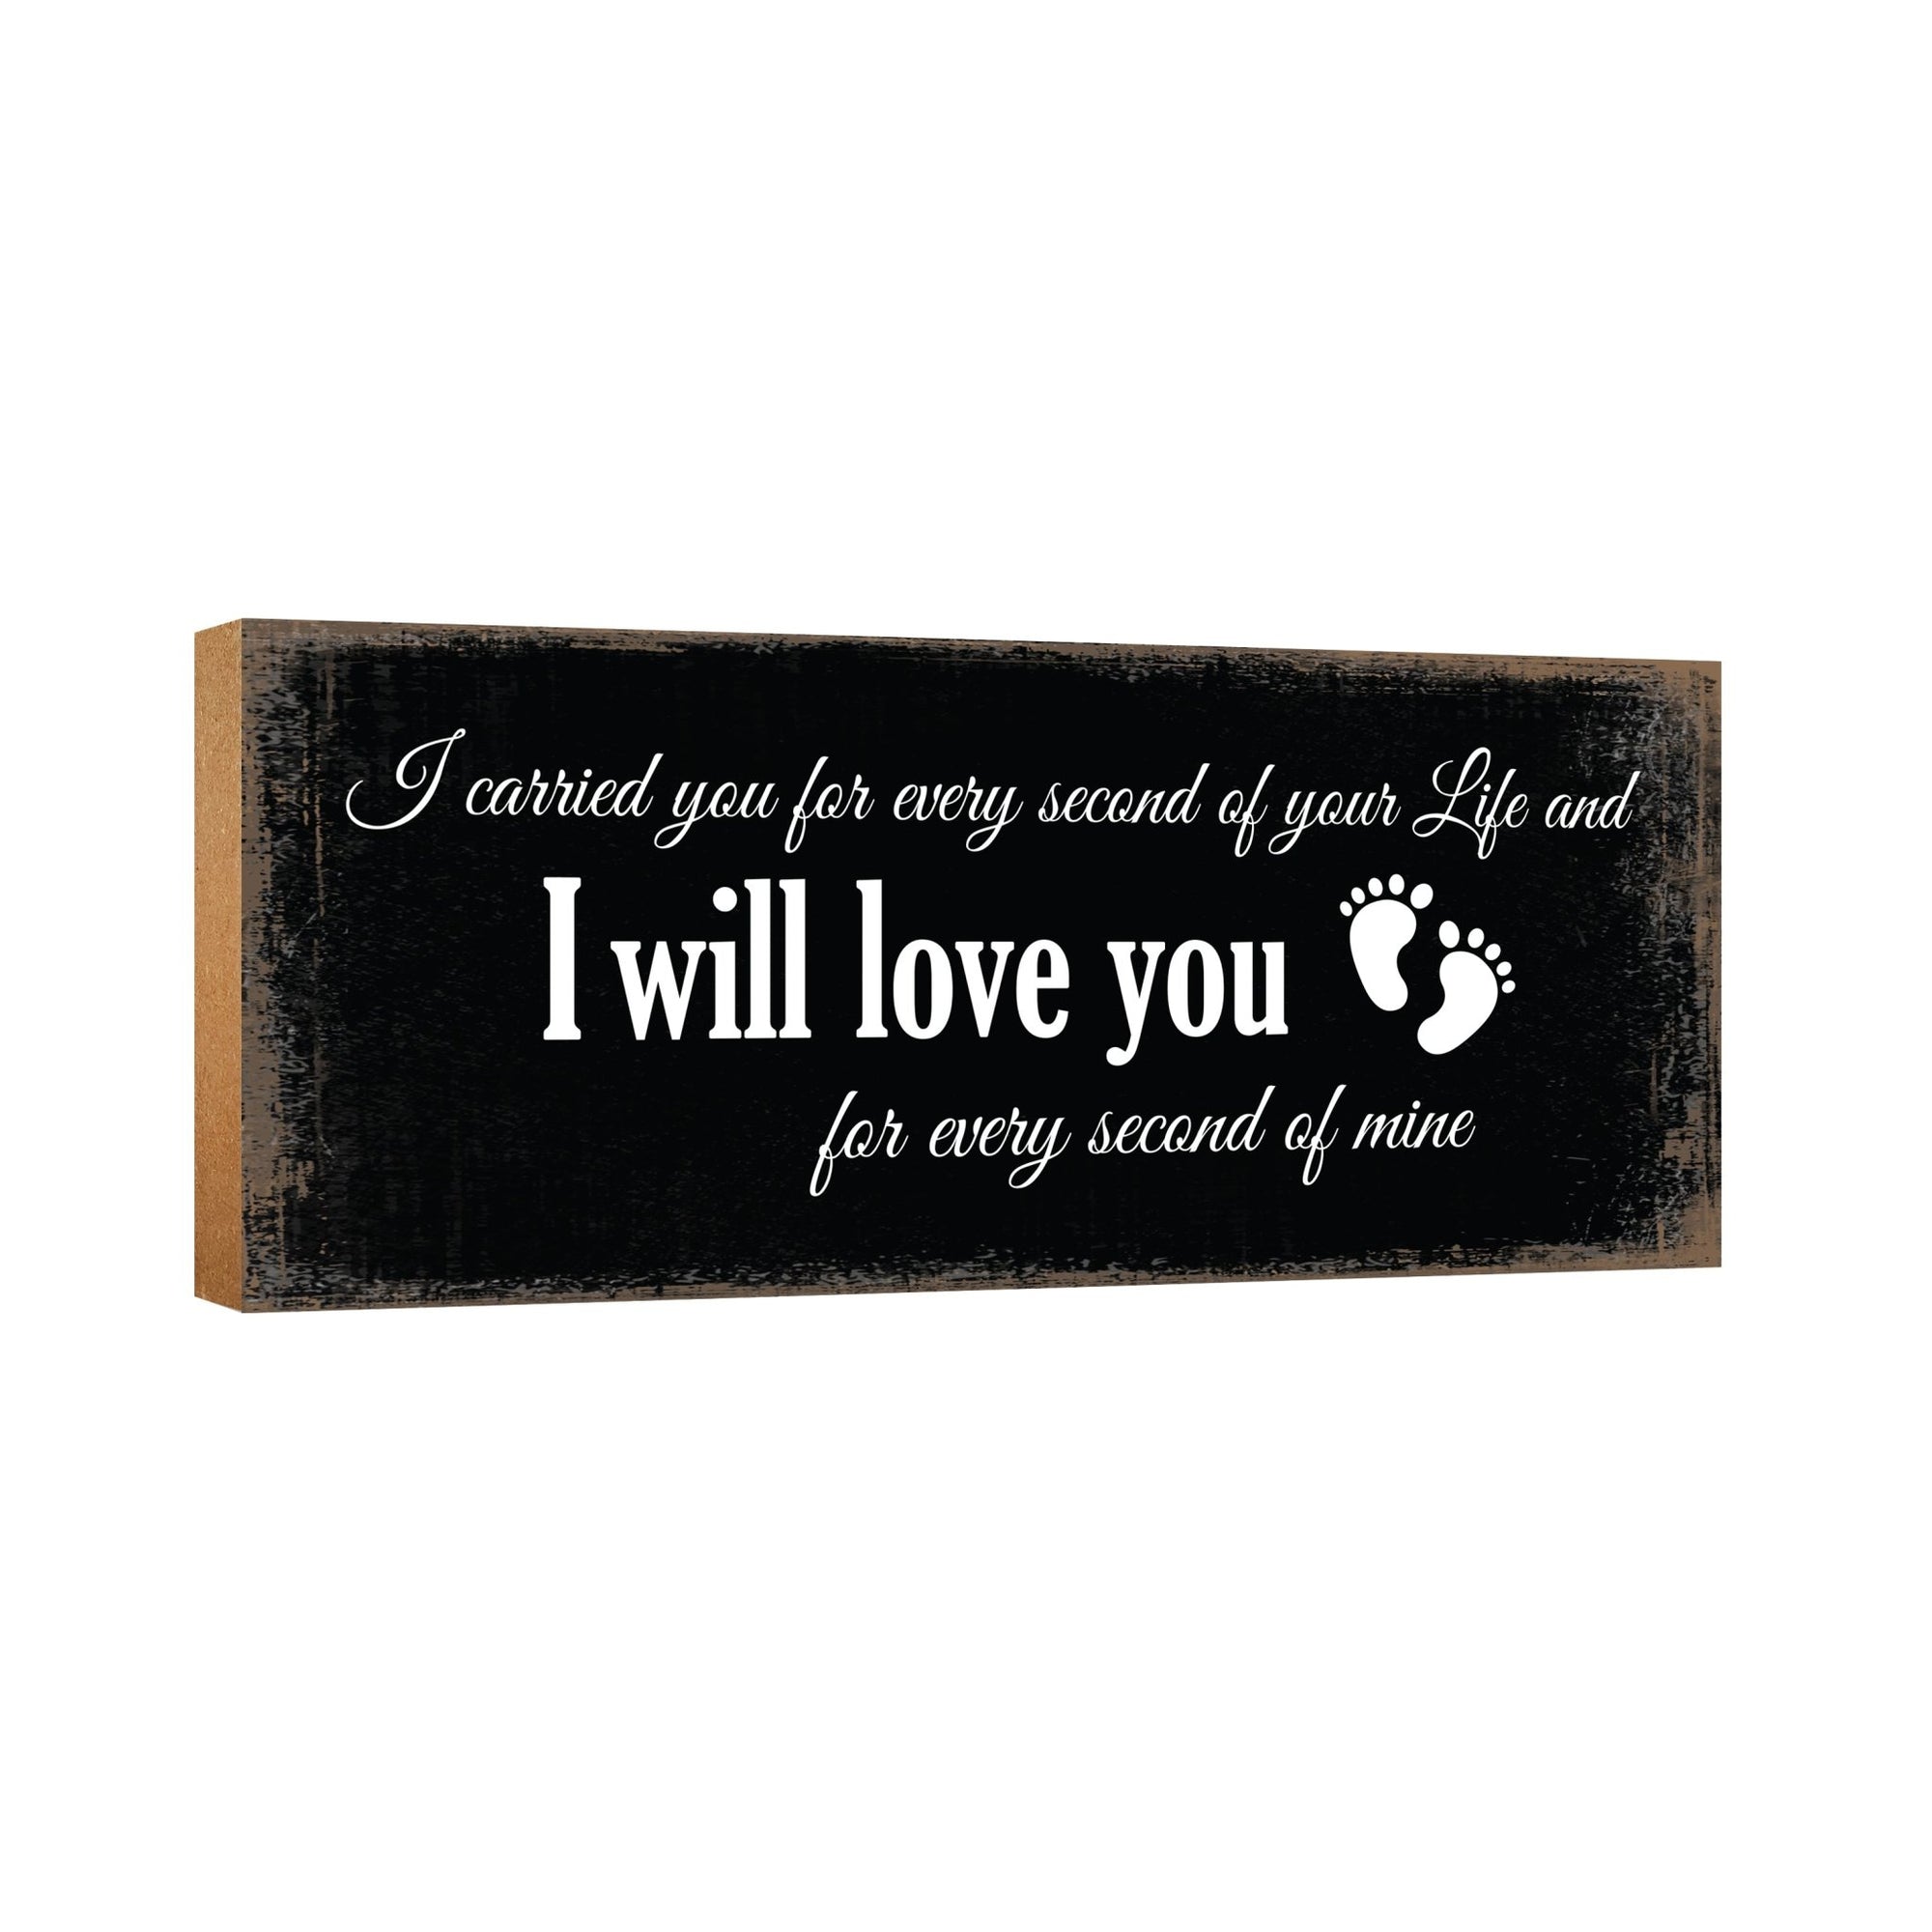 Modern Inspirational Pet Memorial 4x10 inches Wooden Sign (I Will Love You) Tabletop Plaque Home Decoration Loss of Pet Bereavement Sympathy Keepsake - LifeSong Milestones